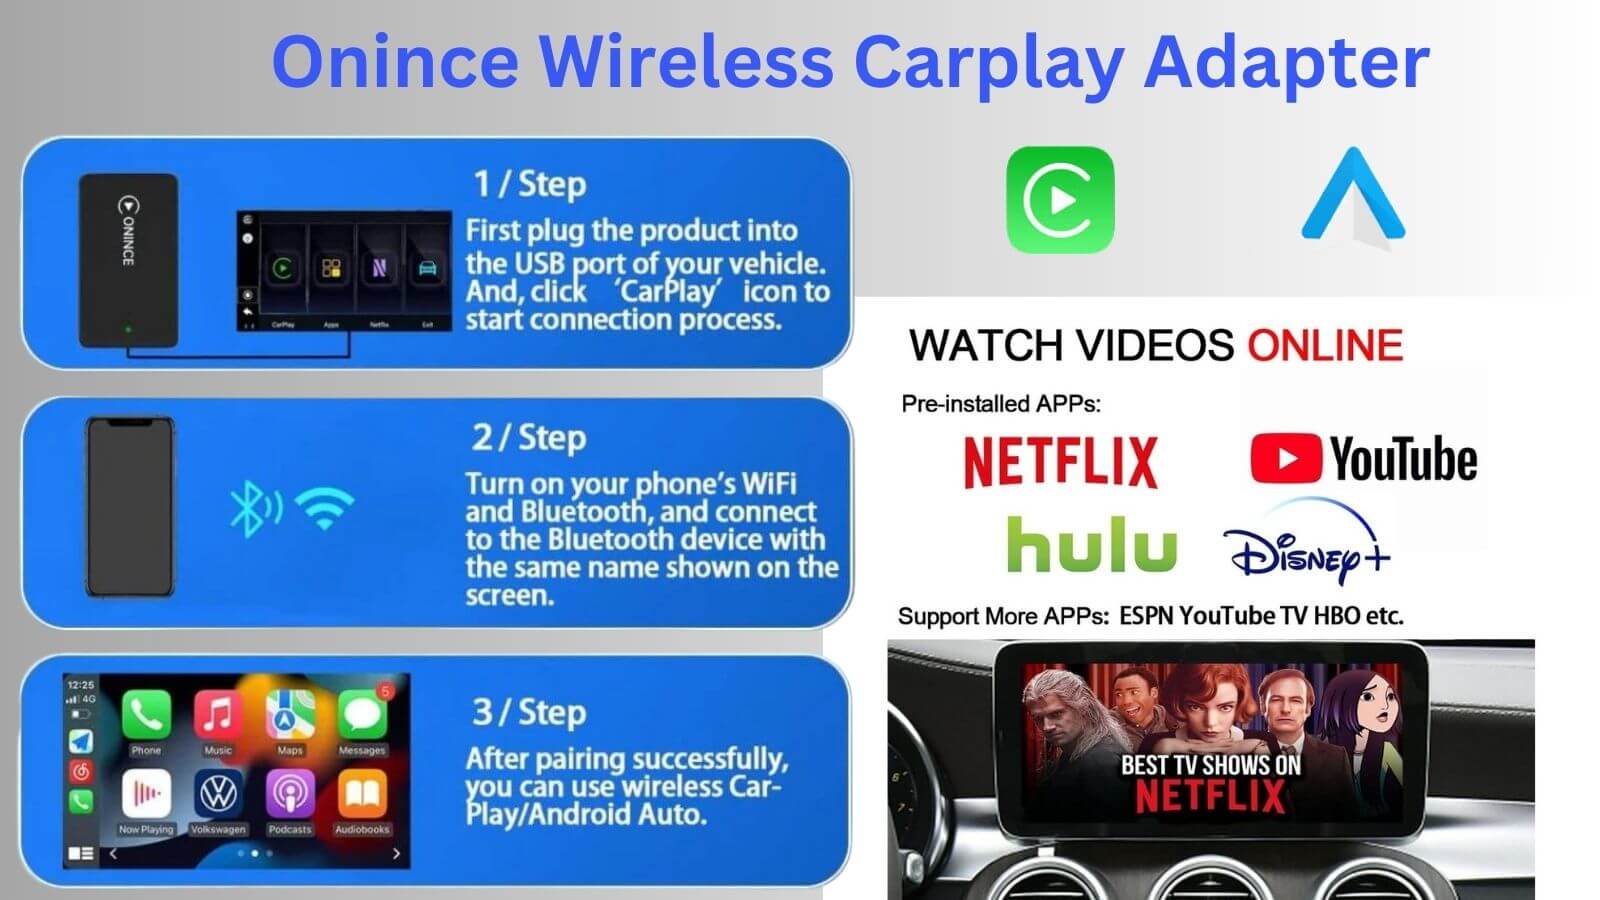 Onince Ai Box Wireless Carplay Adapter for Netflix and Youtube video streaming